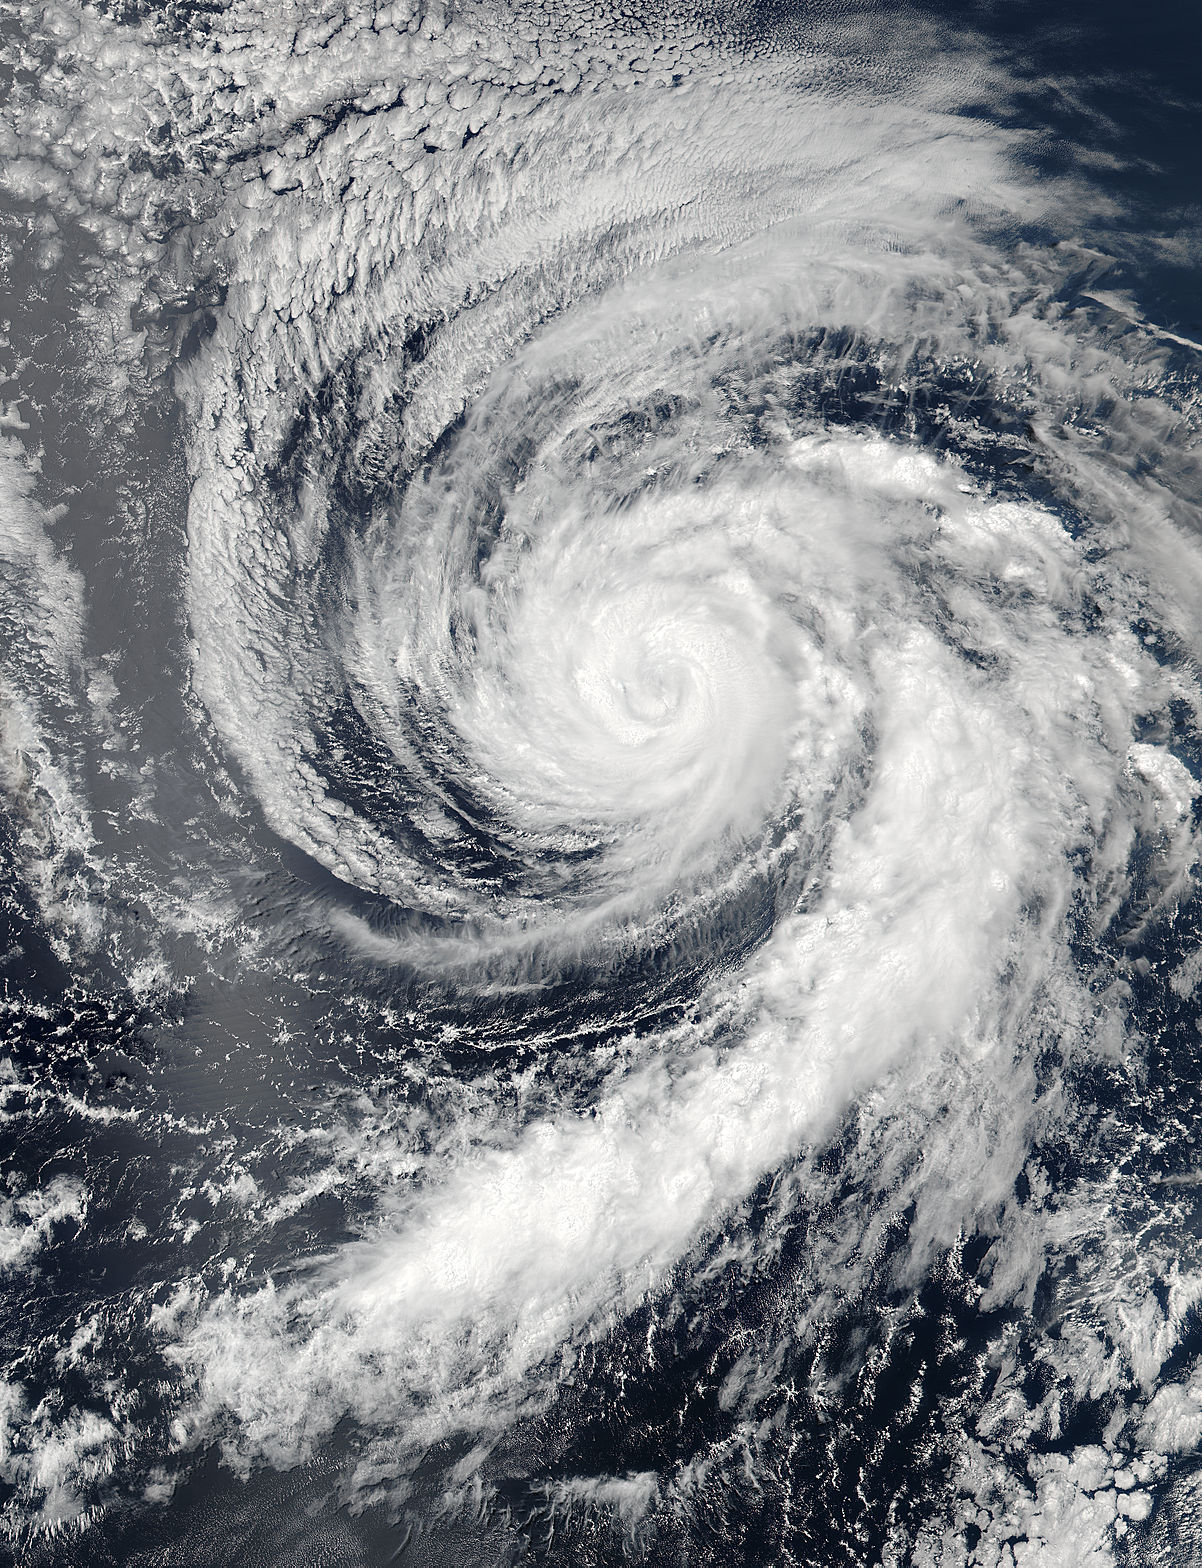 On July 11 at 6:05 p.m. EDT the Suomi NPP satellite captured a visible light image of Hurricane Celia.  